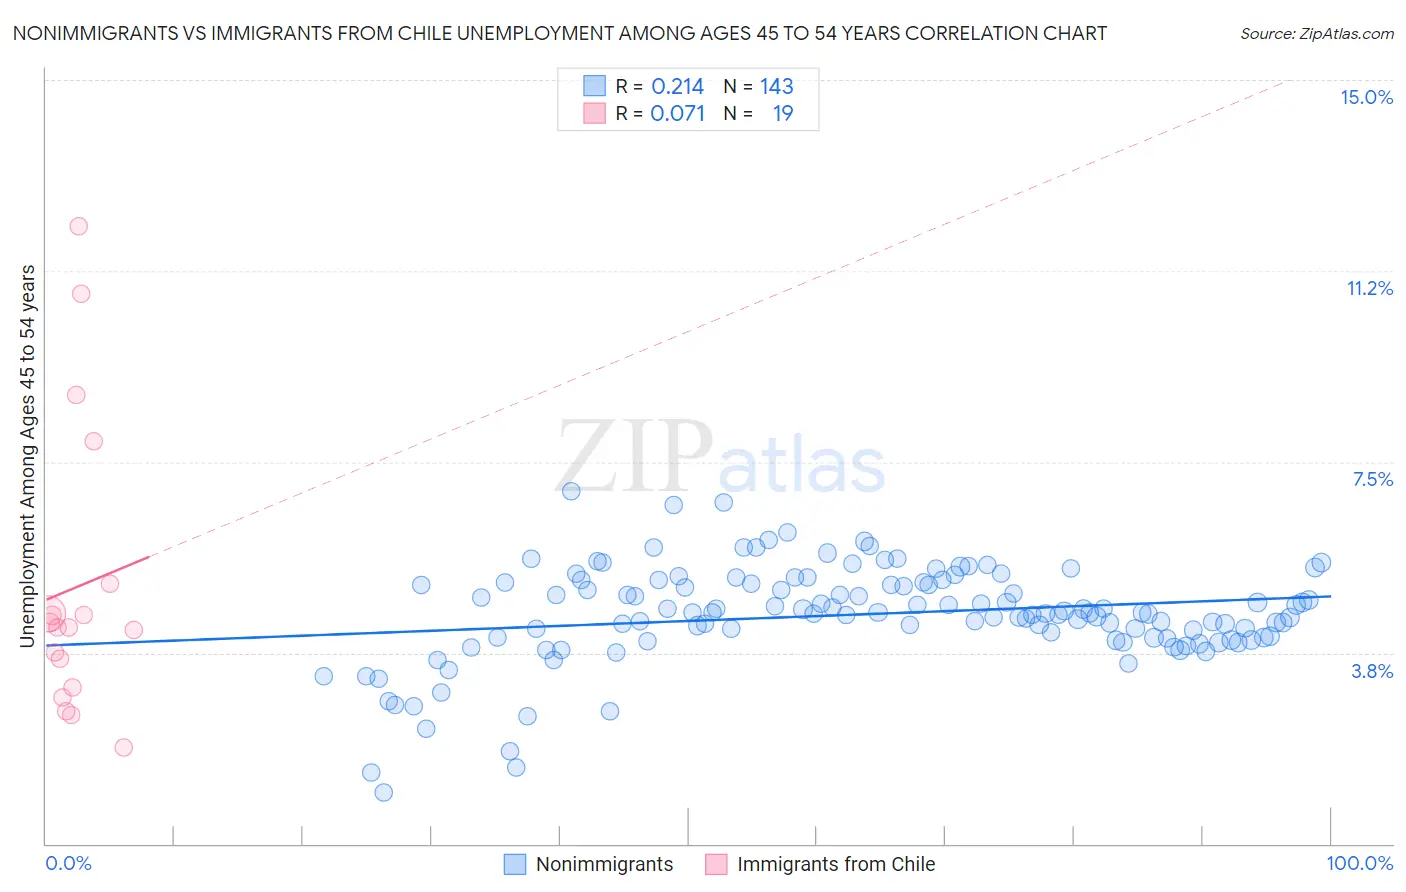 Nonimmigrants vs Immigrants from Chile Unemployment Among Ages 45 to 54 years